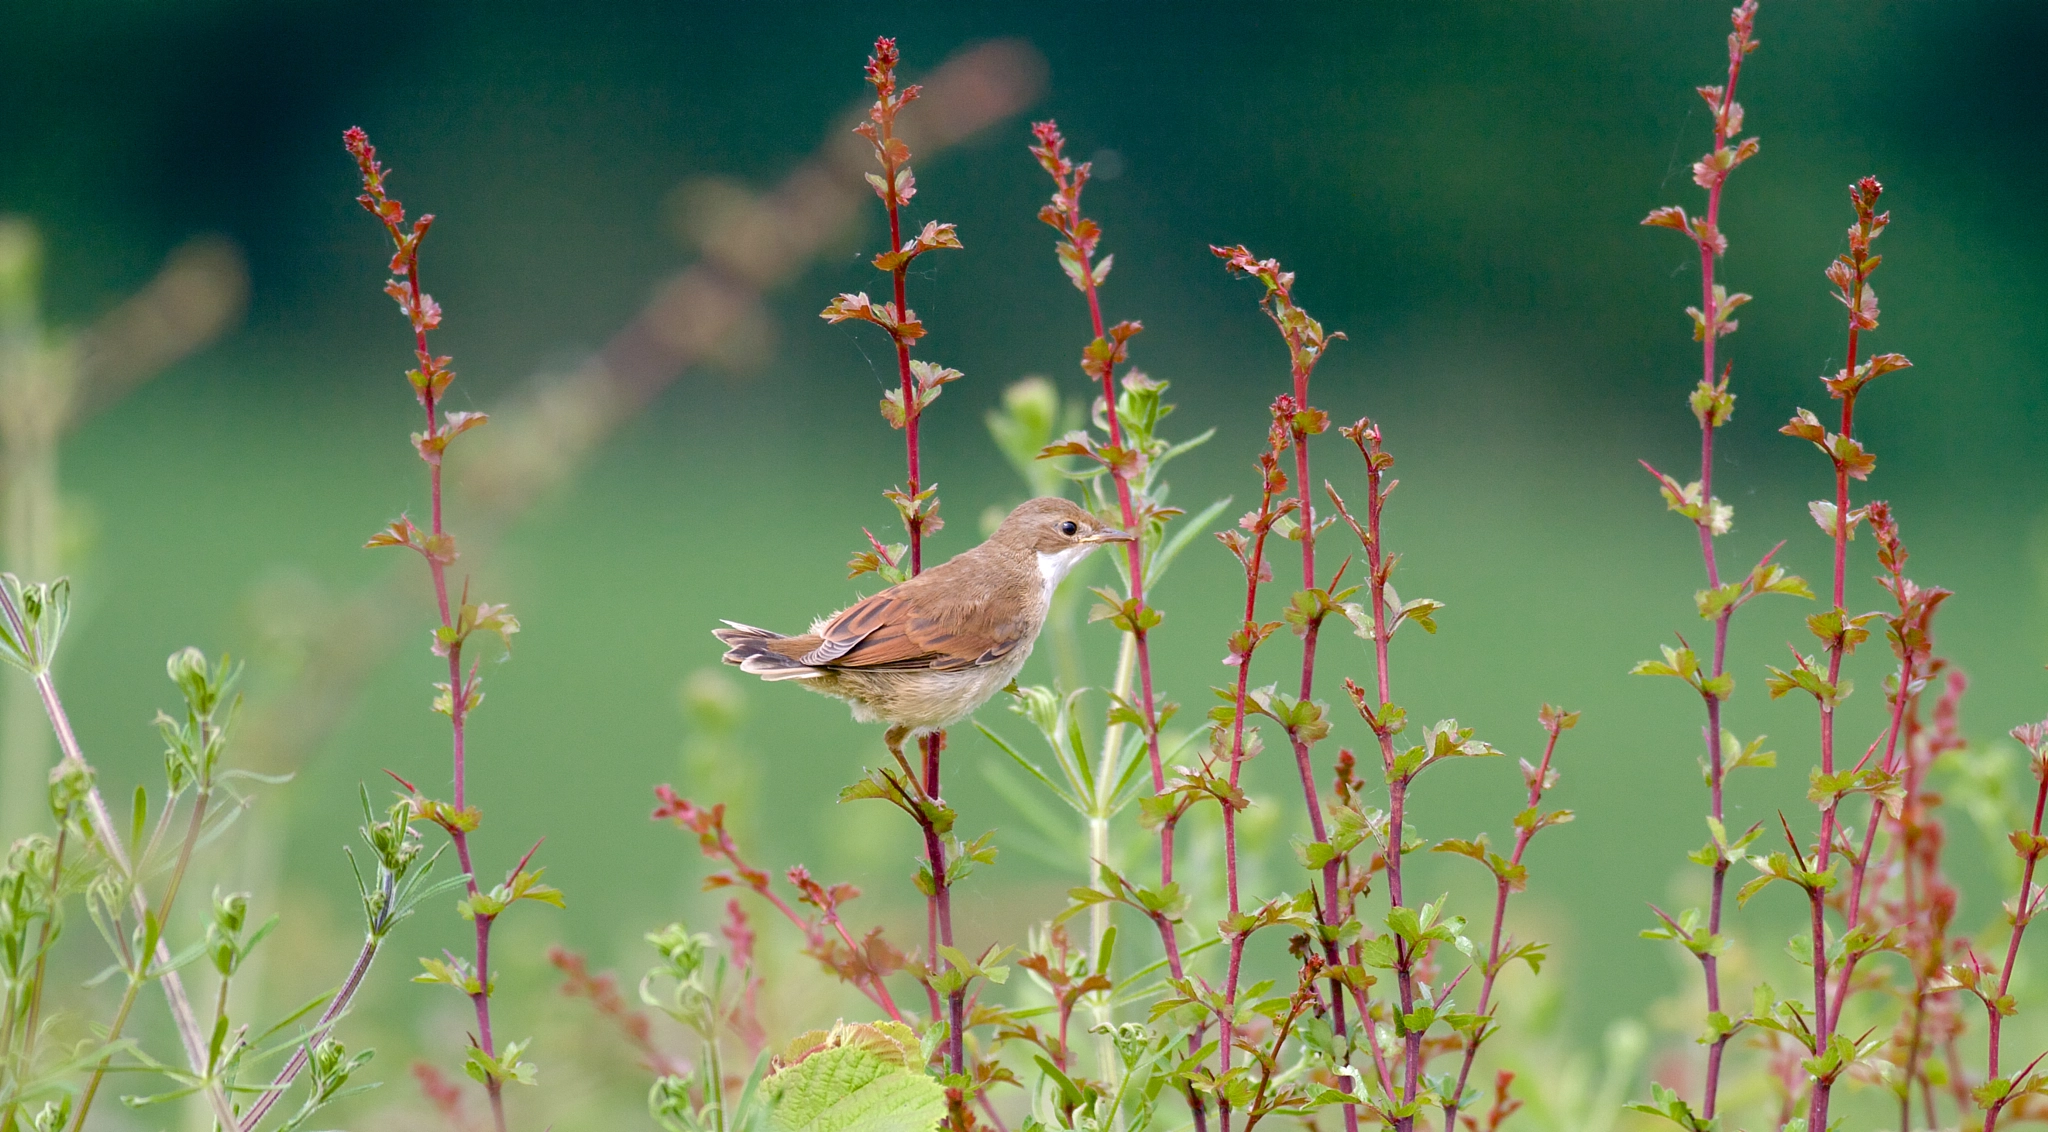 JUVENILE WHITETHROAT AT WIGMORE ABBEY